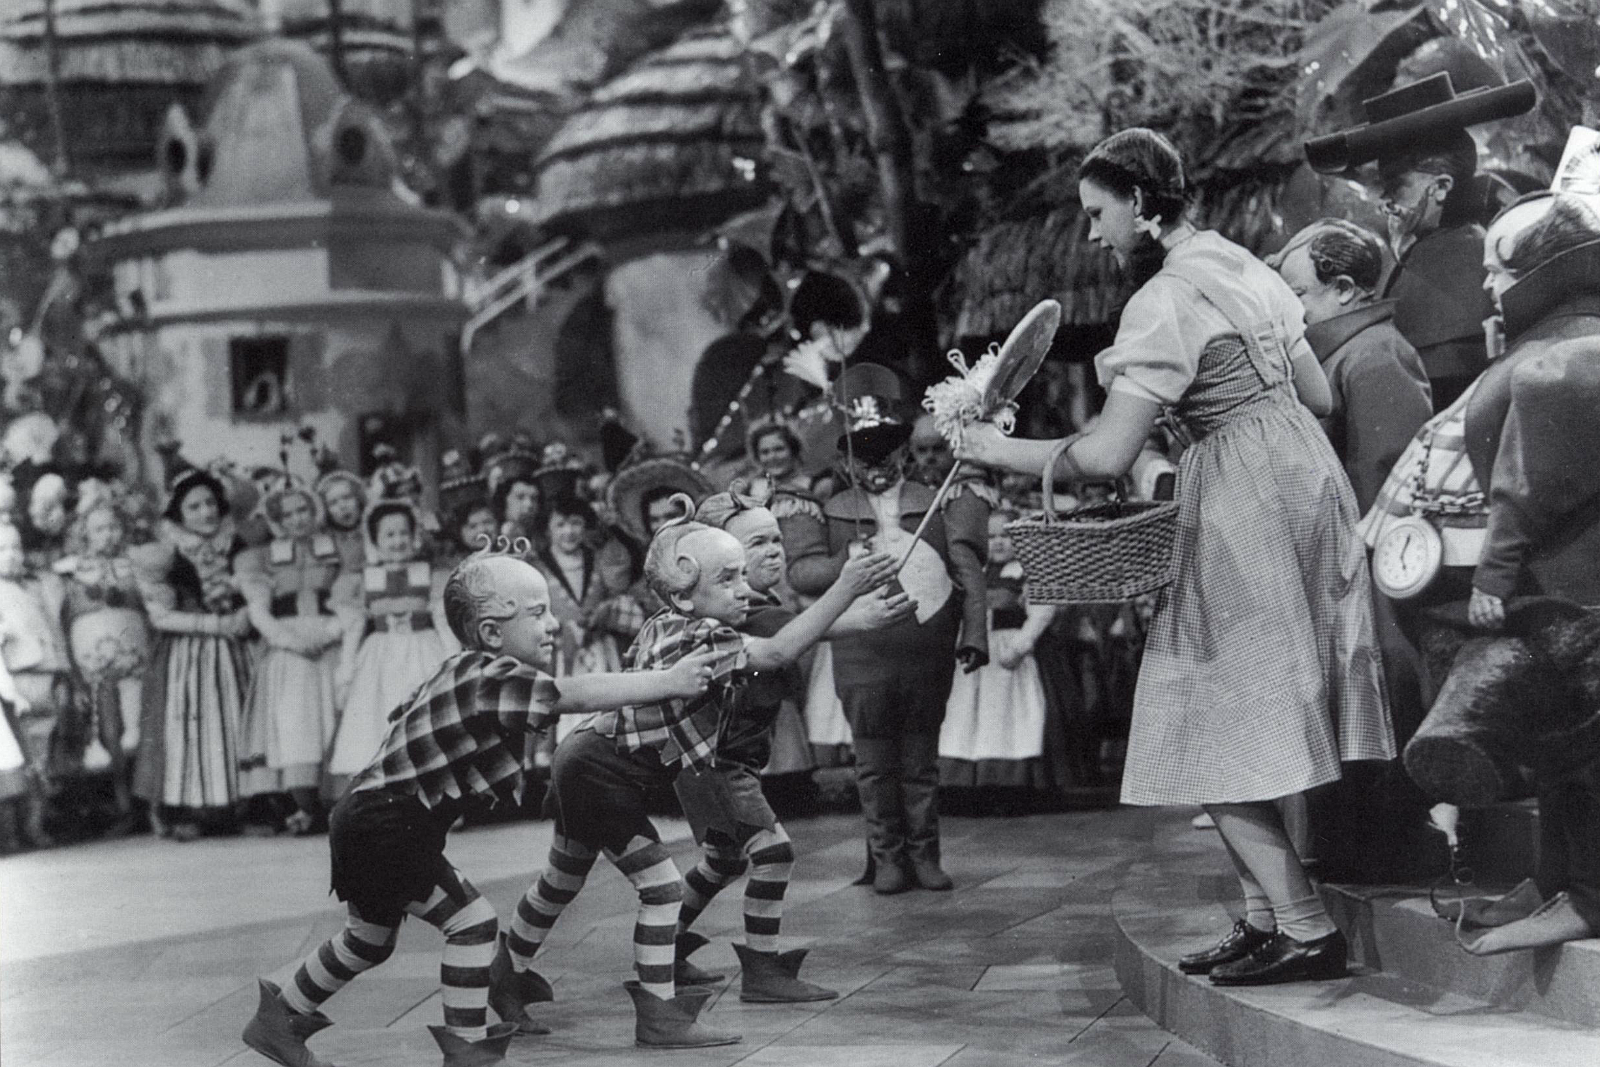 The Premiere of The Wizard of Oz